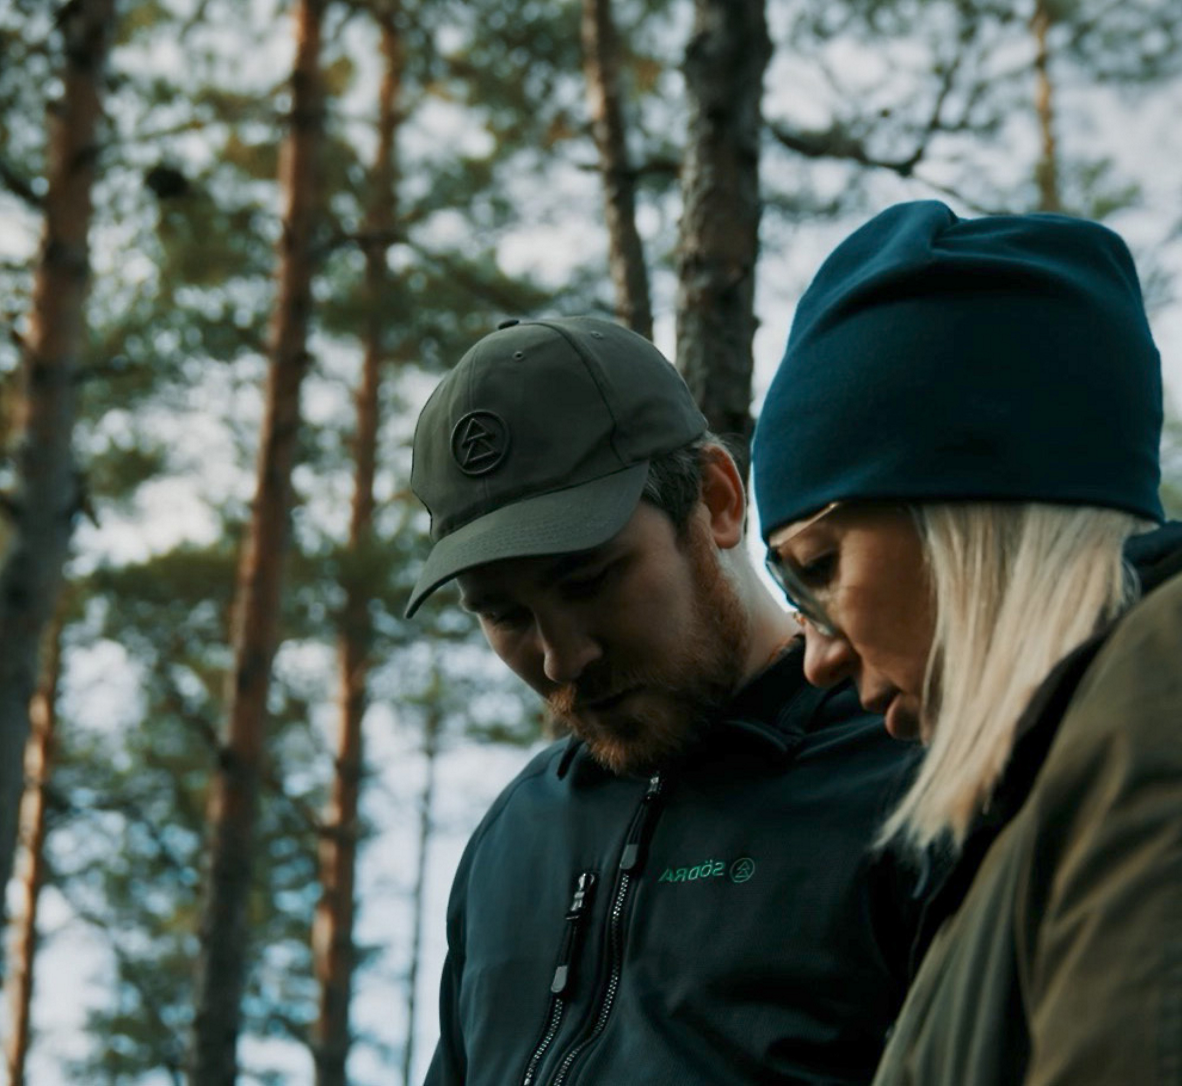 Two people wearing outdoor clothing stand closely together in a forest, looking down at something.